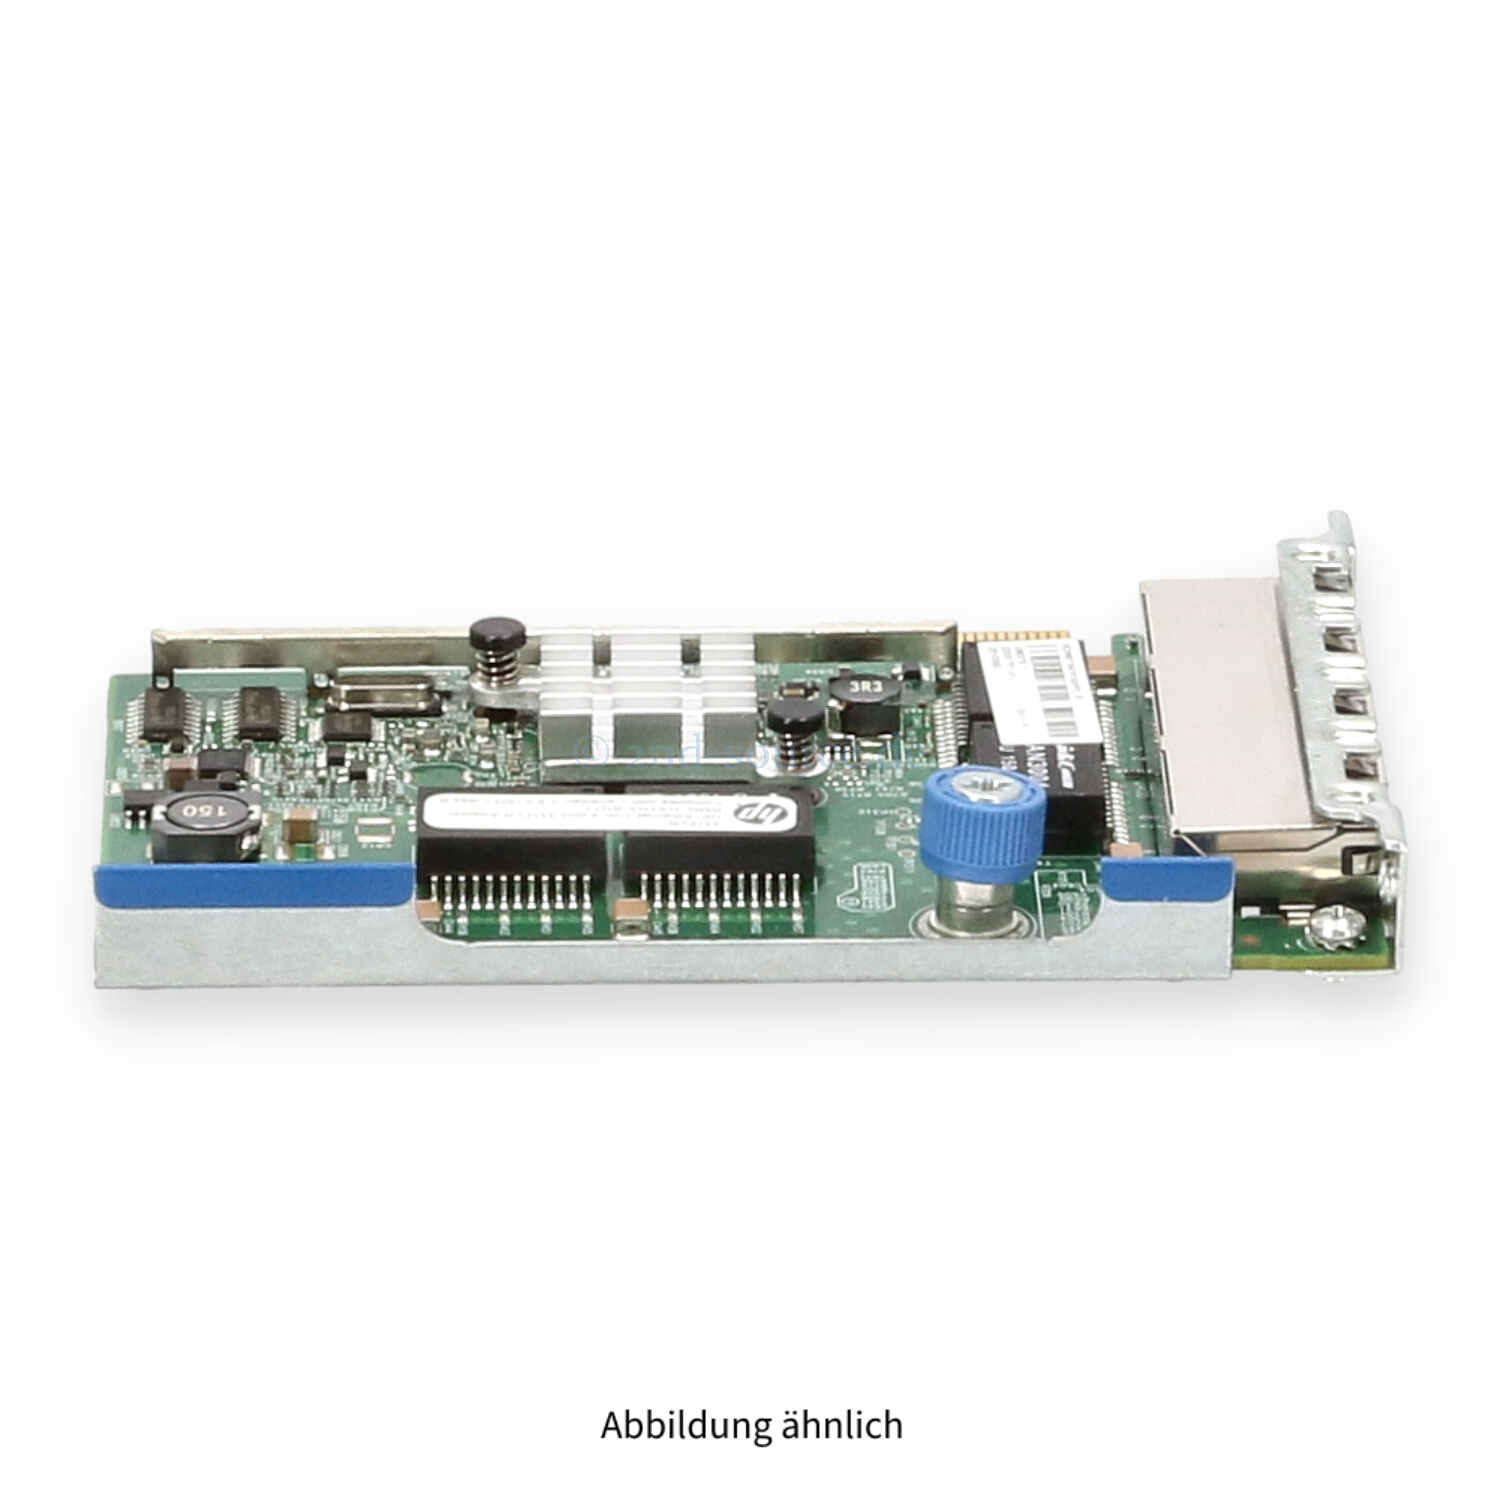 HPE 331FLR-T 4x 1GbE Server Ethernet Adapter 629135-B22 789897-001 629133-002